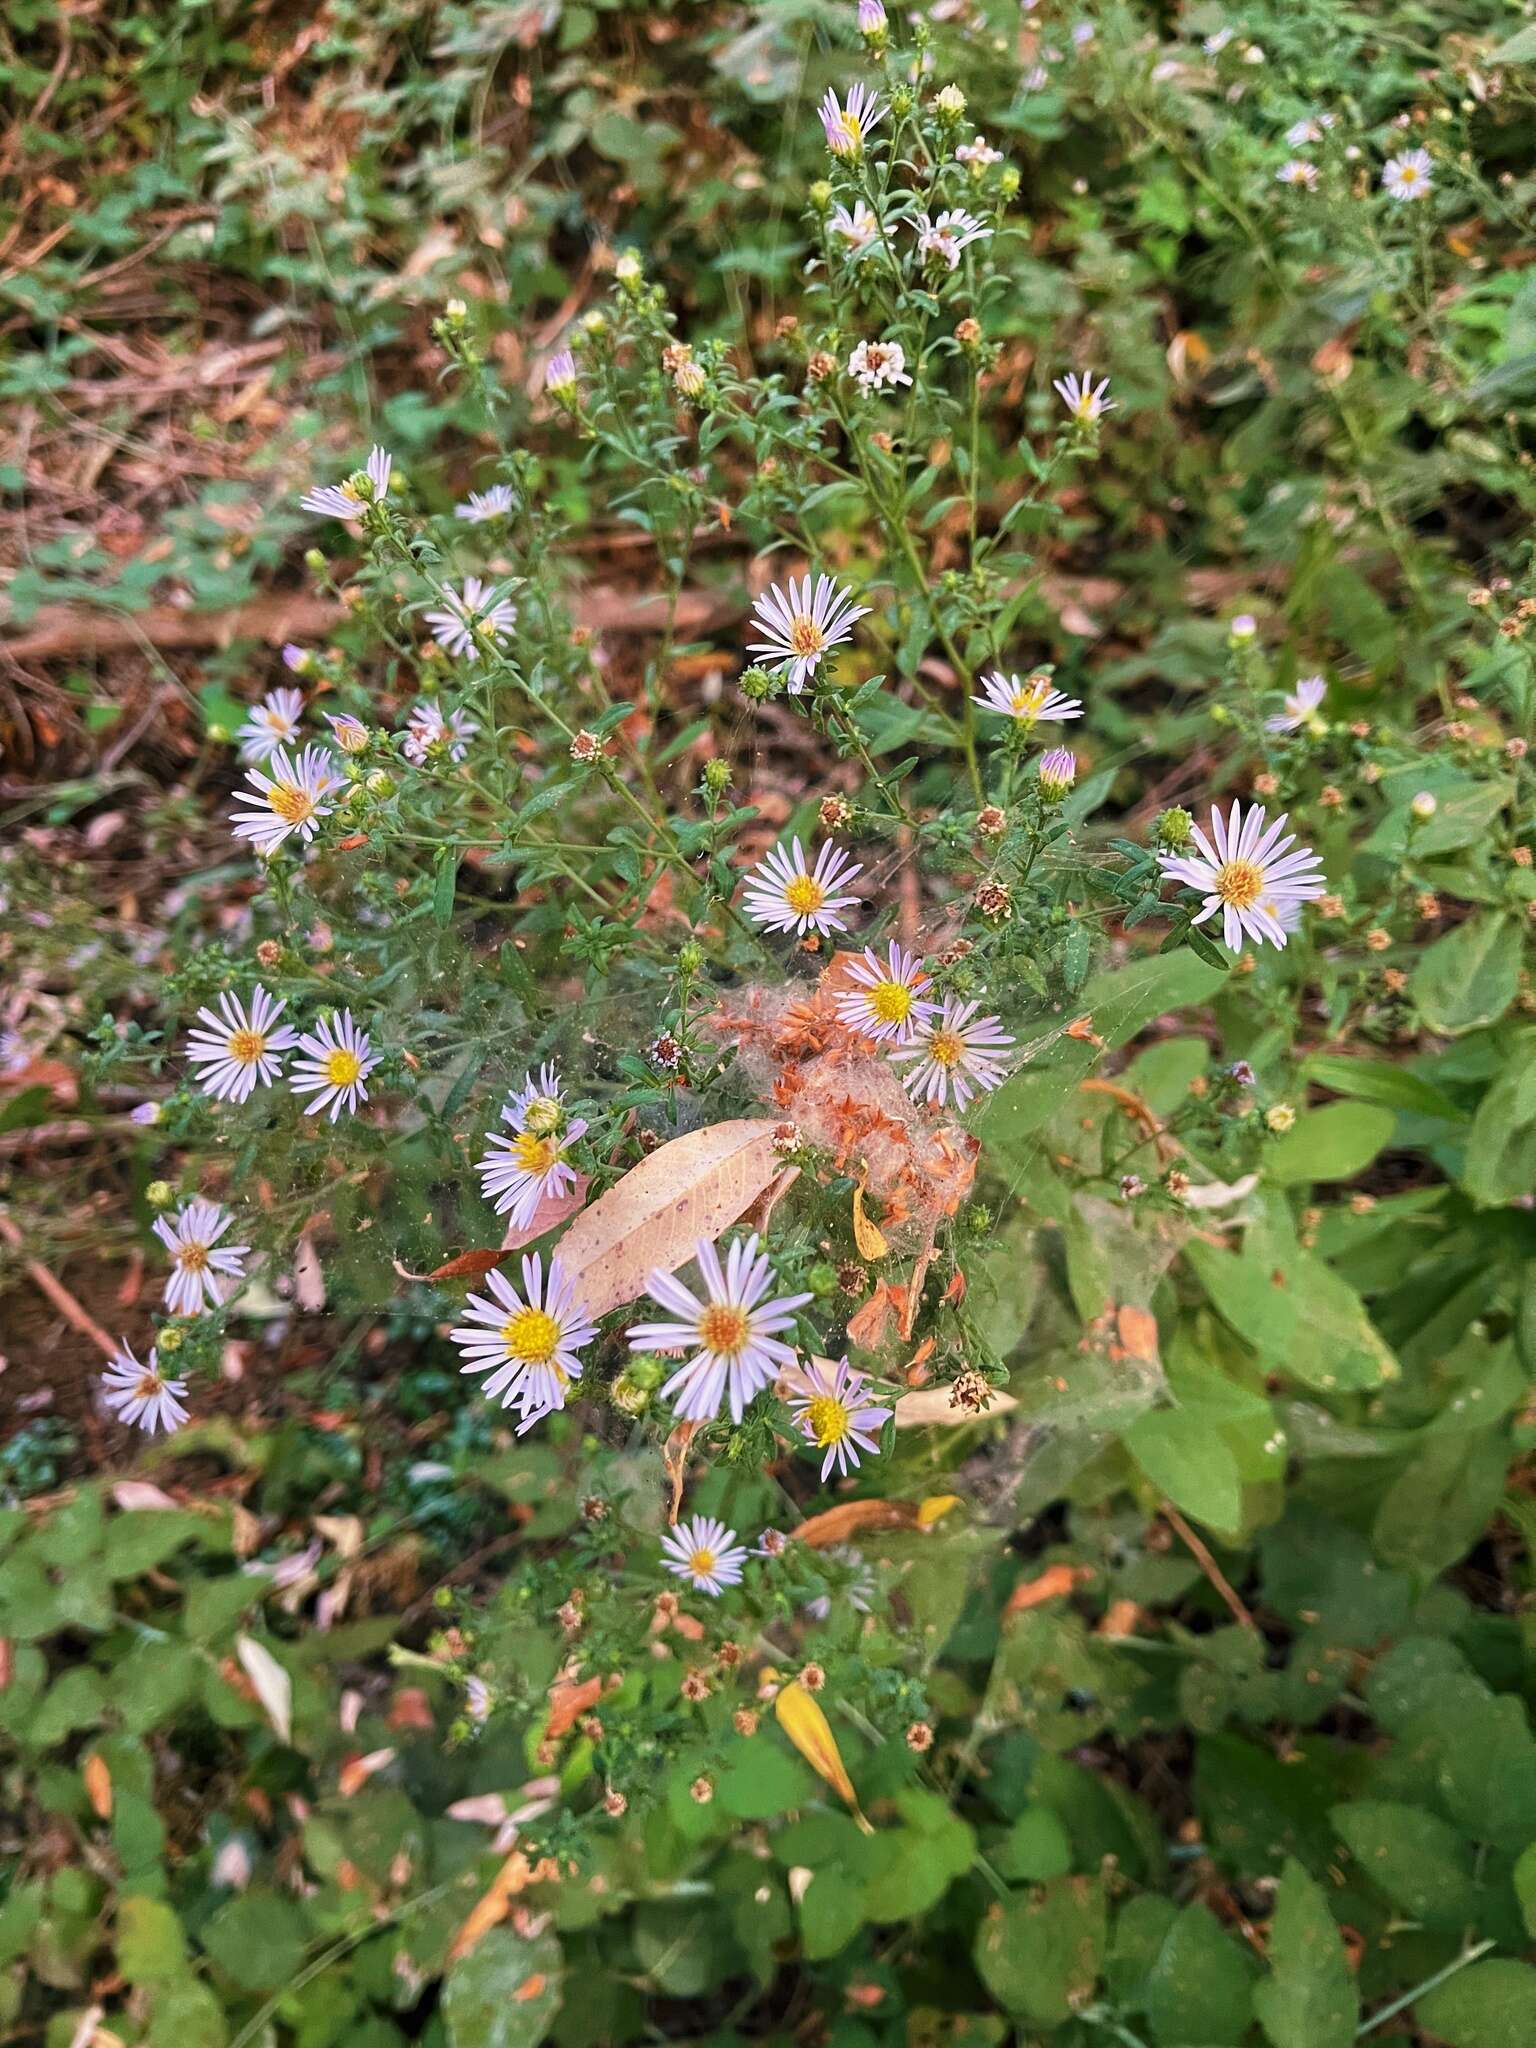 Image of Greata's aster